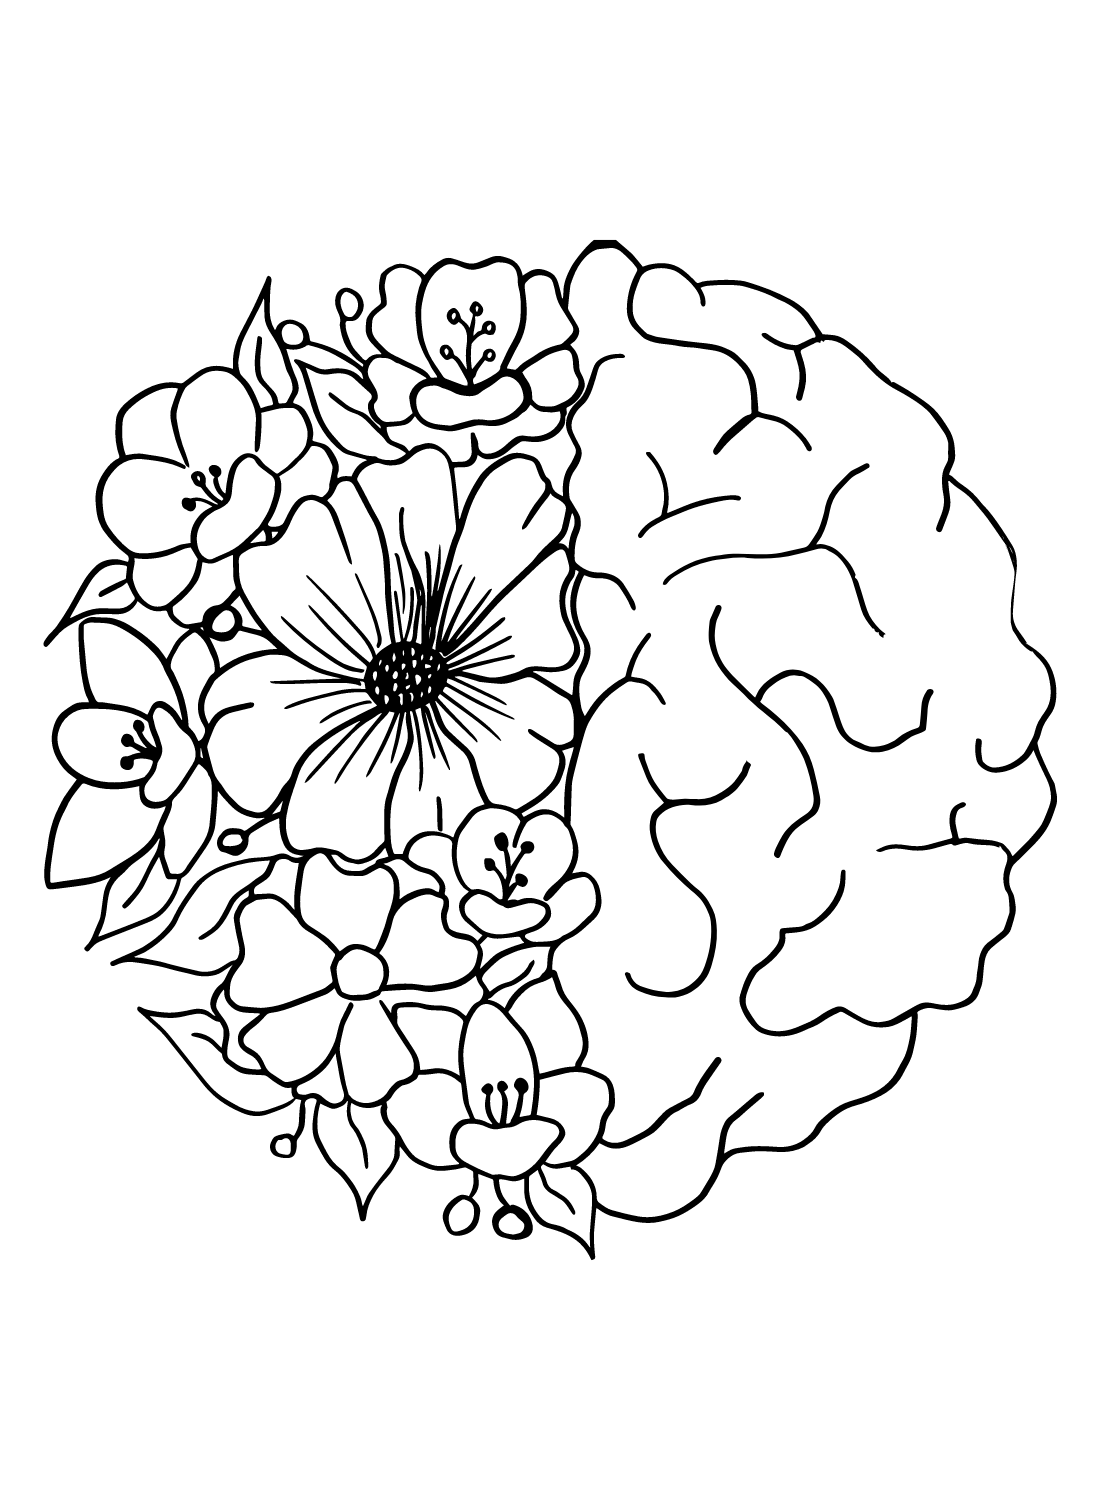 Printable Mental Health Coloring Page Free Printable Coloring Pages